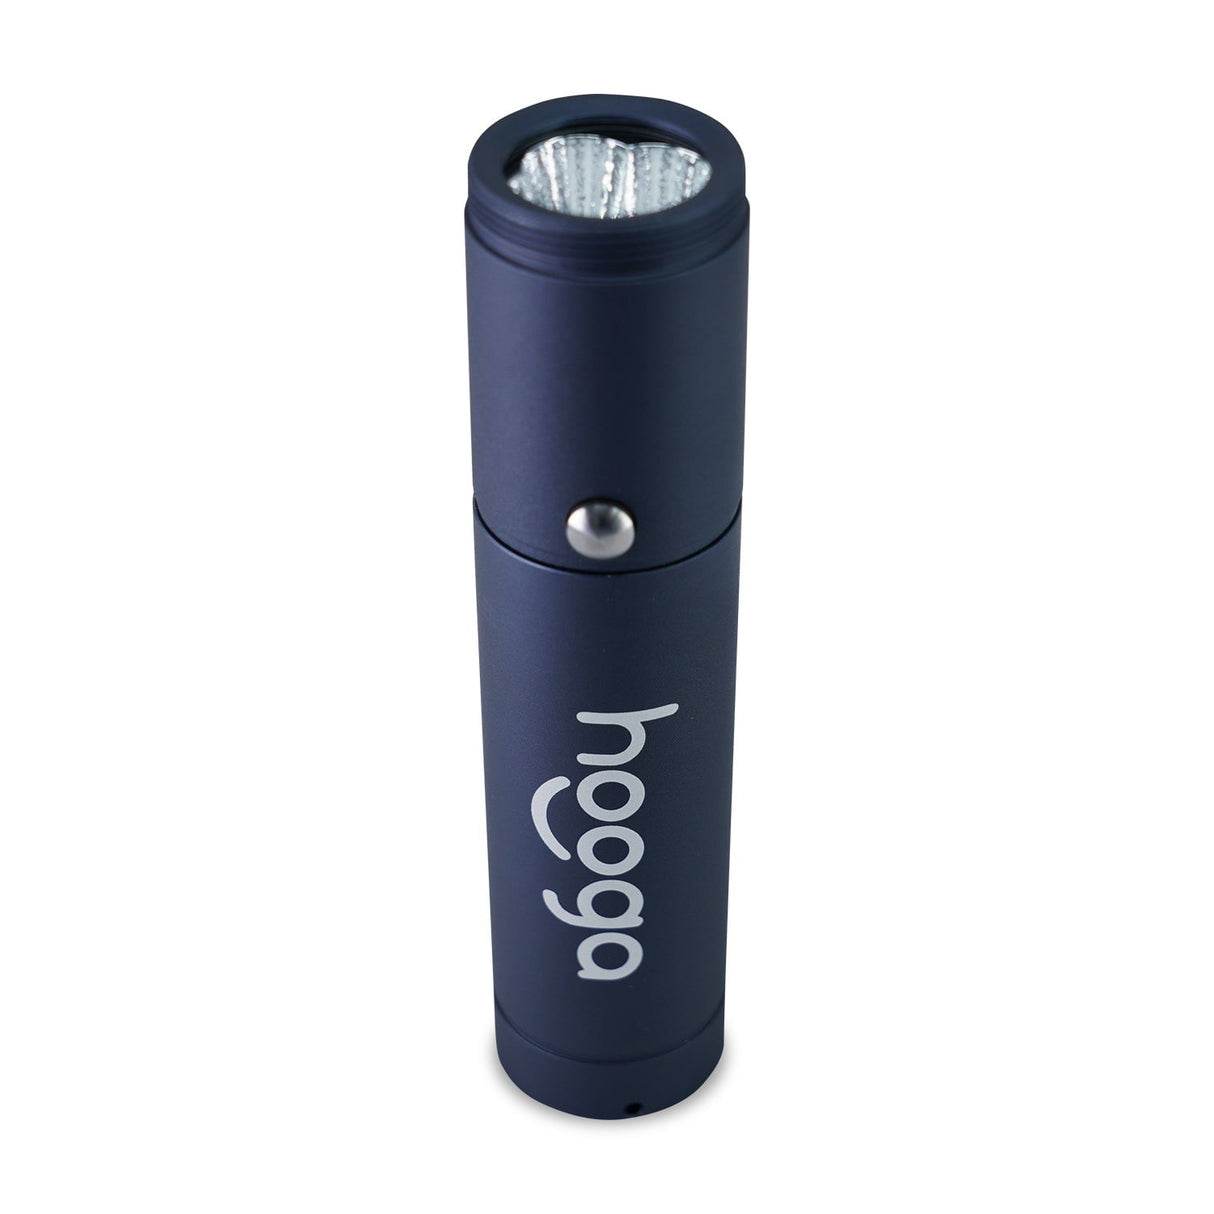 Hooga Torch Red Light Therapy Devices